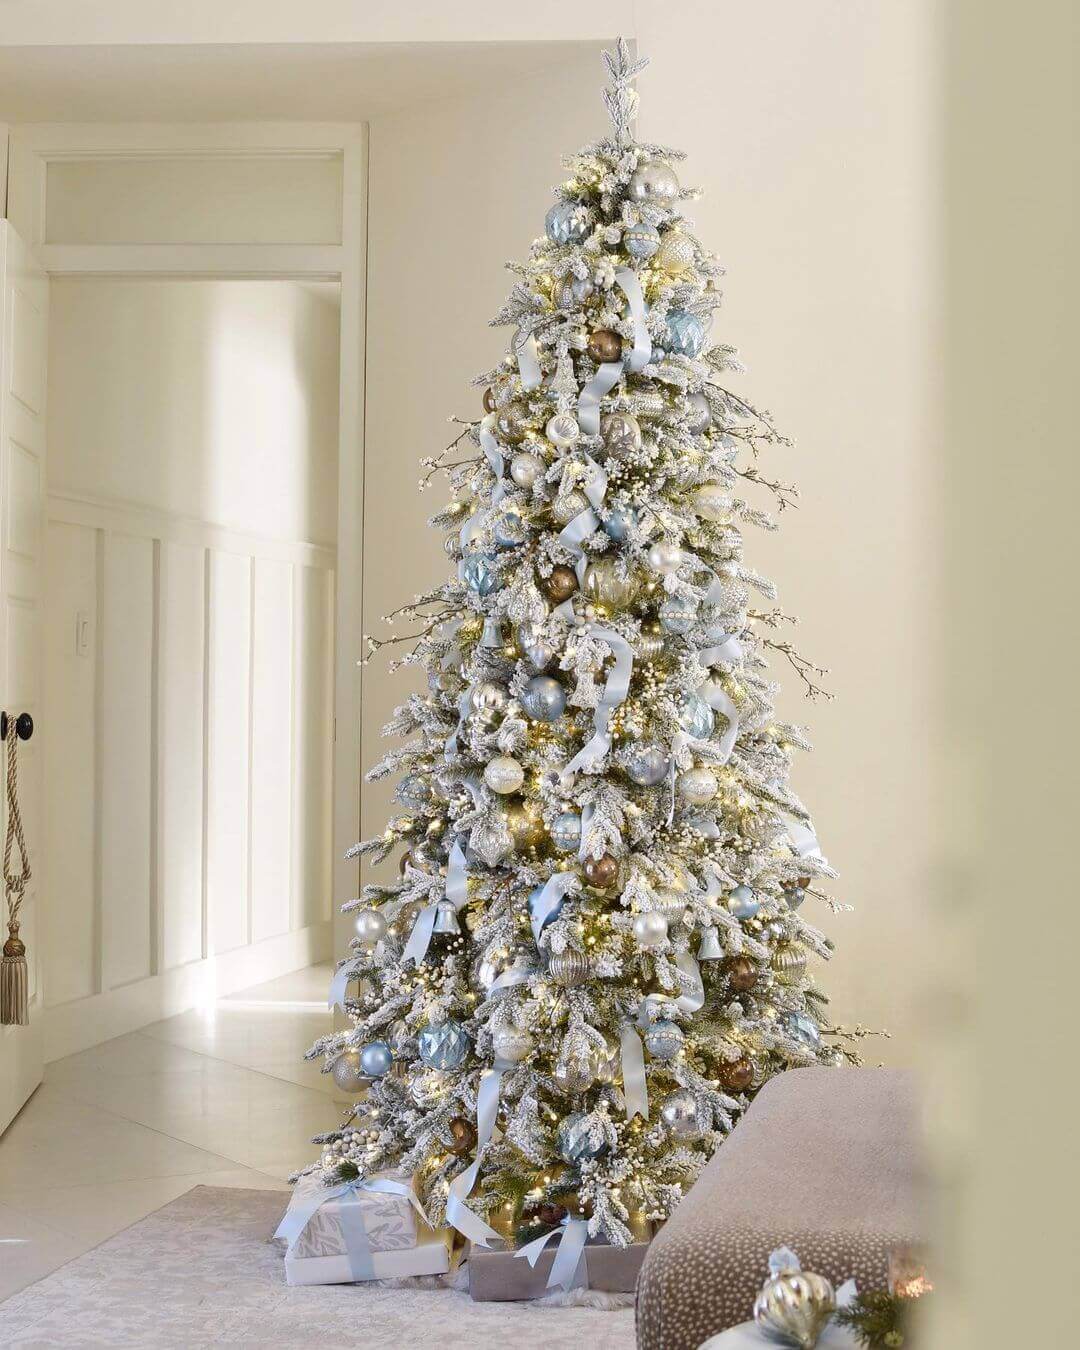 King of Christmas 8' Queen Flock® Slim Artificial Christmas Tree With 700 Warm White LED Lights